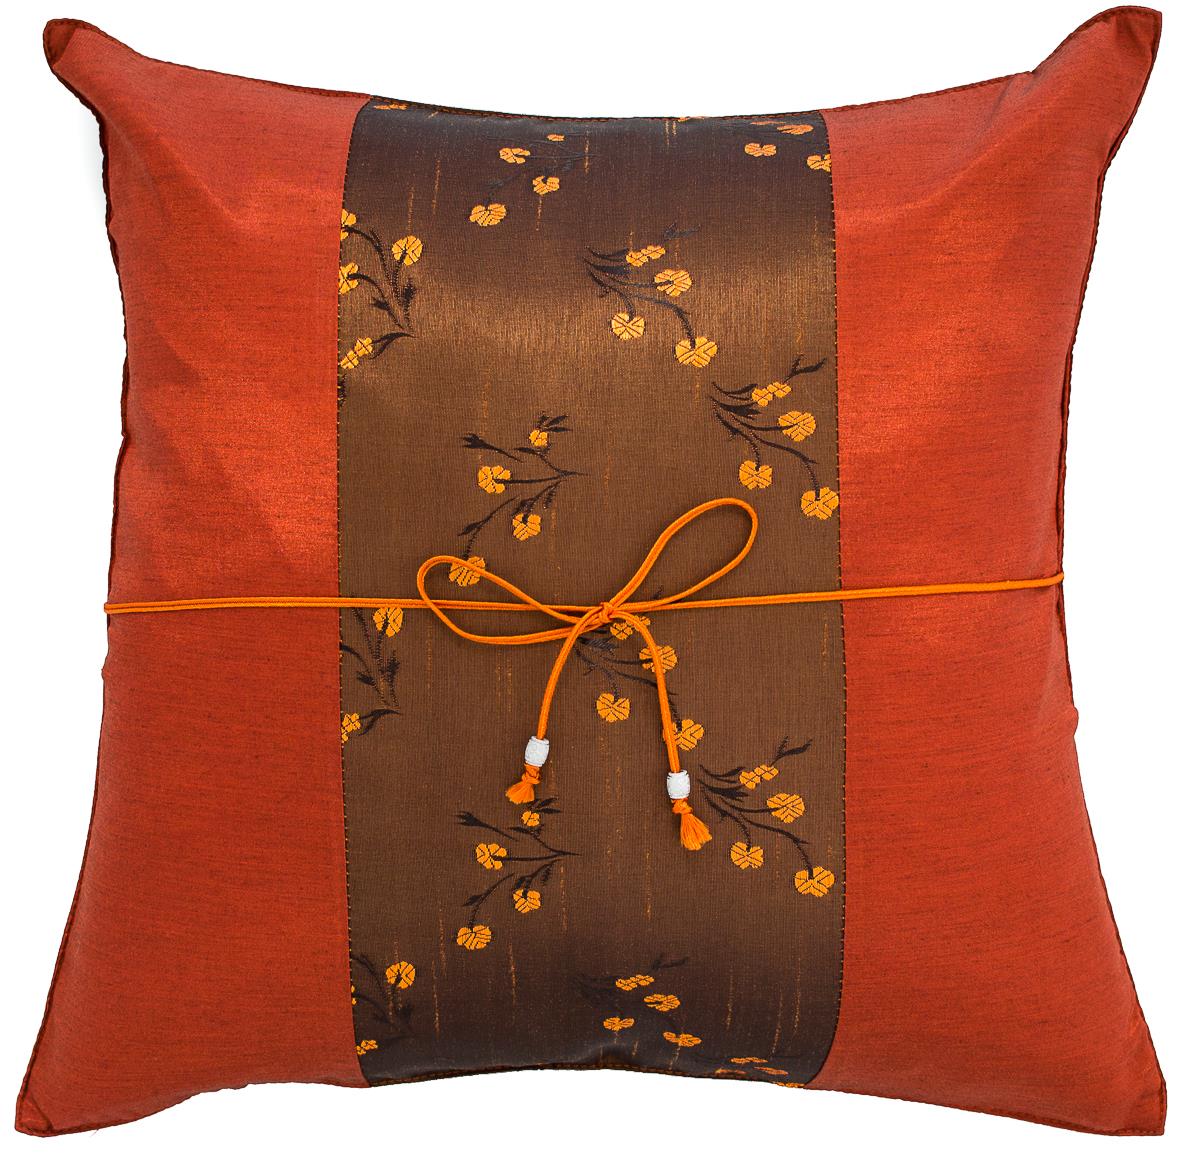 Avarada Striped Mei Floral Flower Throw Pillow Cover Decorative Sofa Couch Cushion Cover Zippered 16x16 Inch (40x40 cm) Scarlet Brunt Orange Brown 